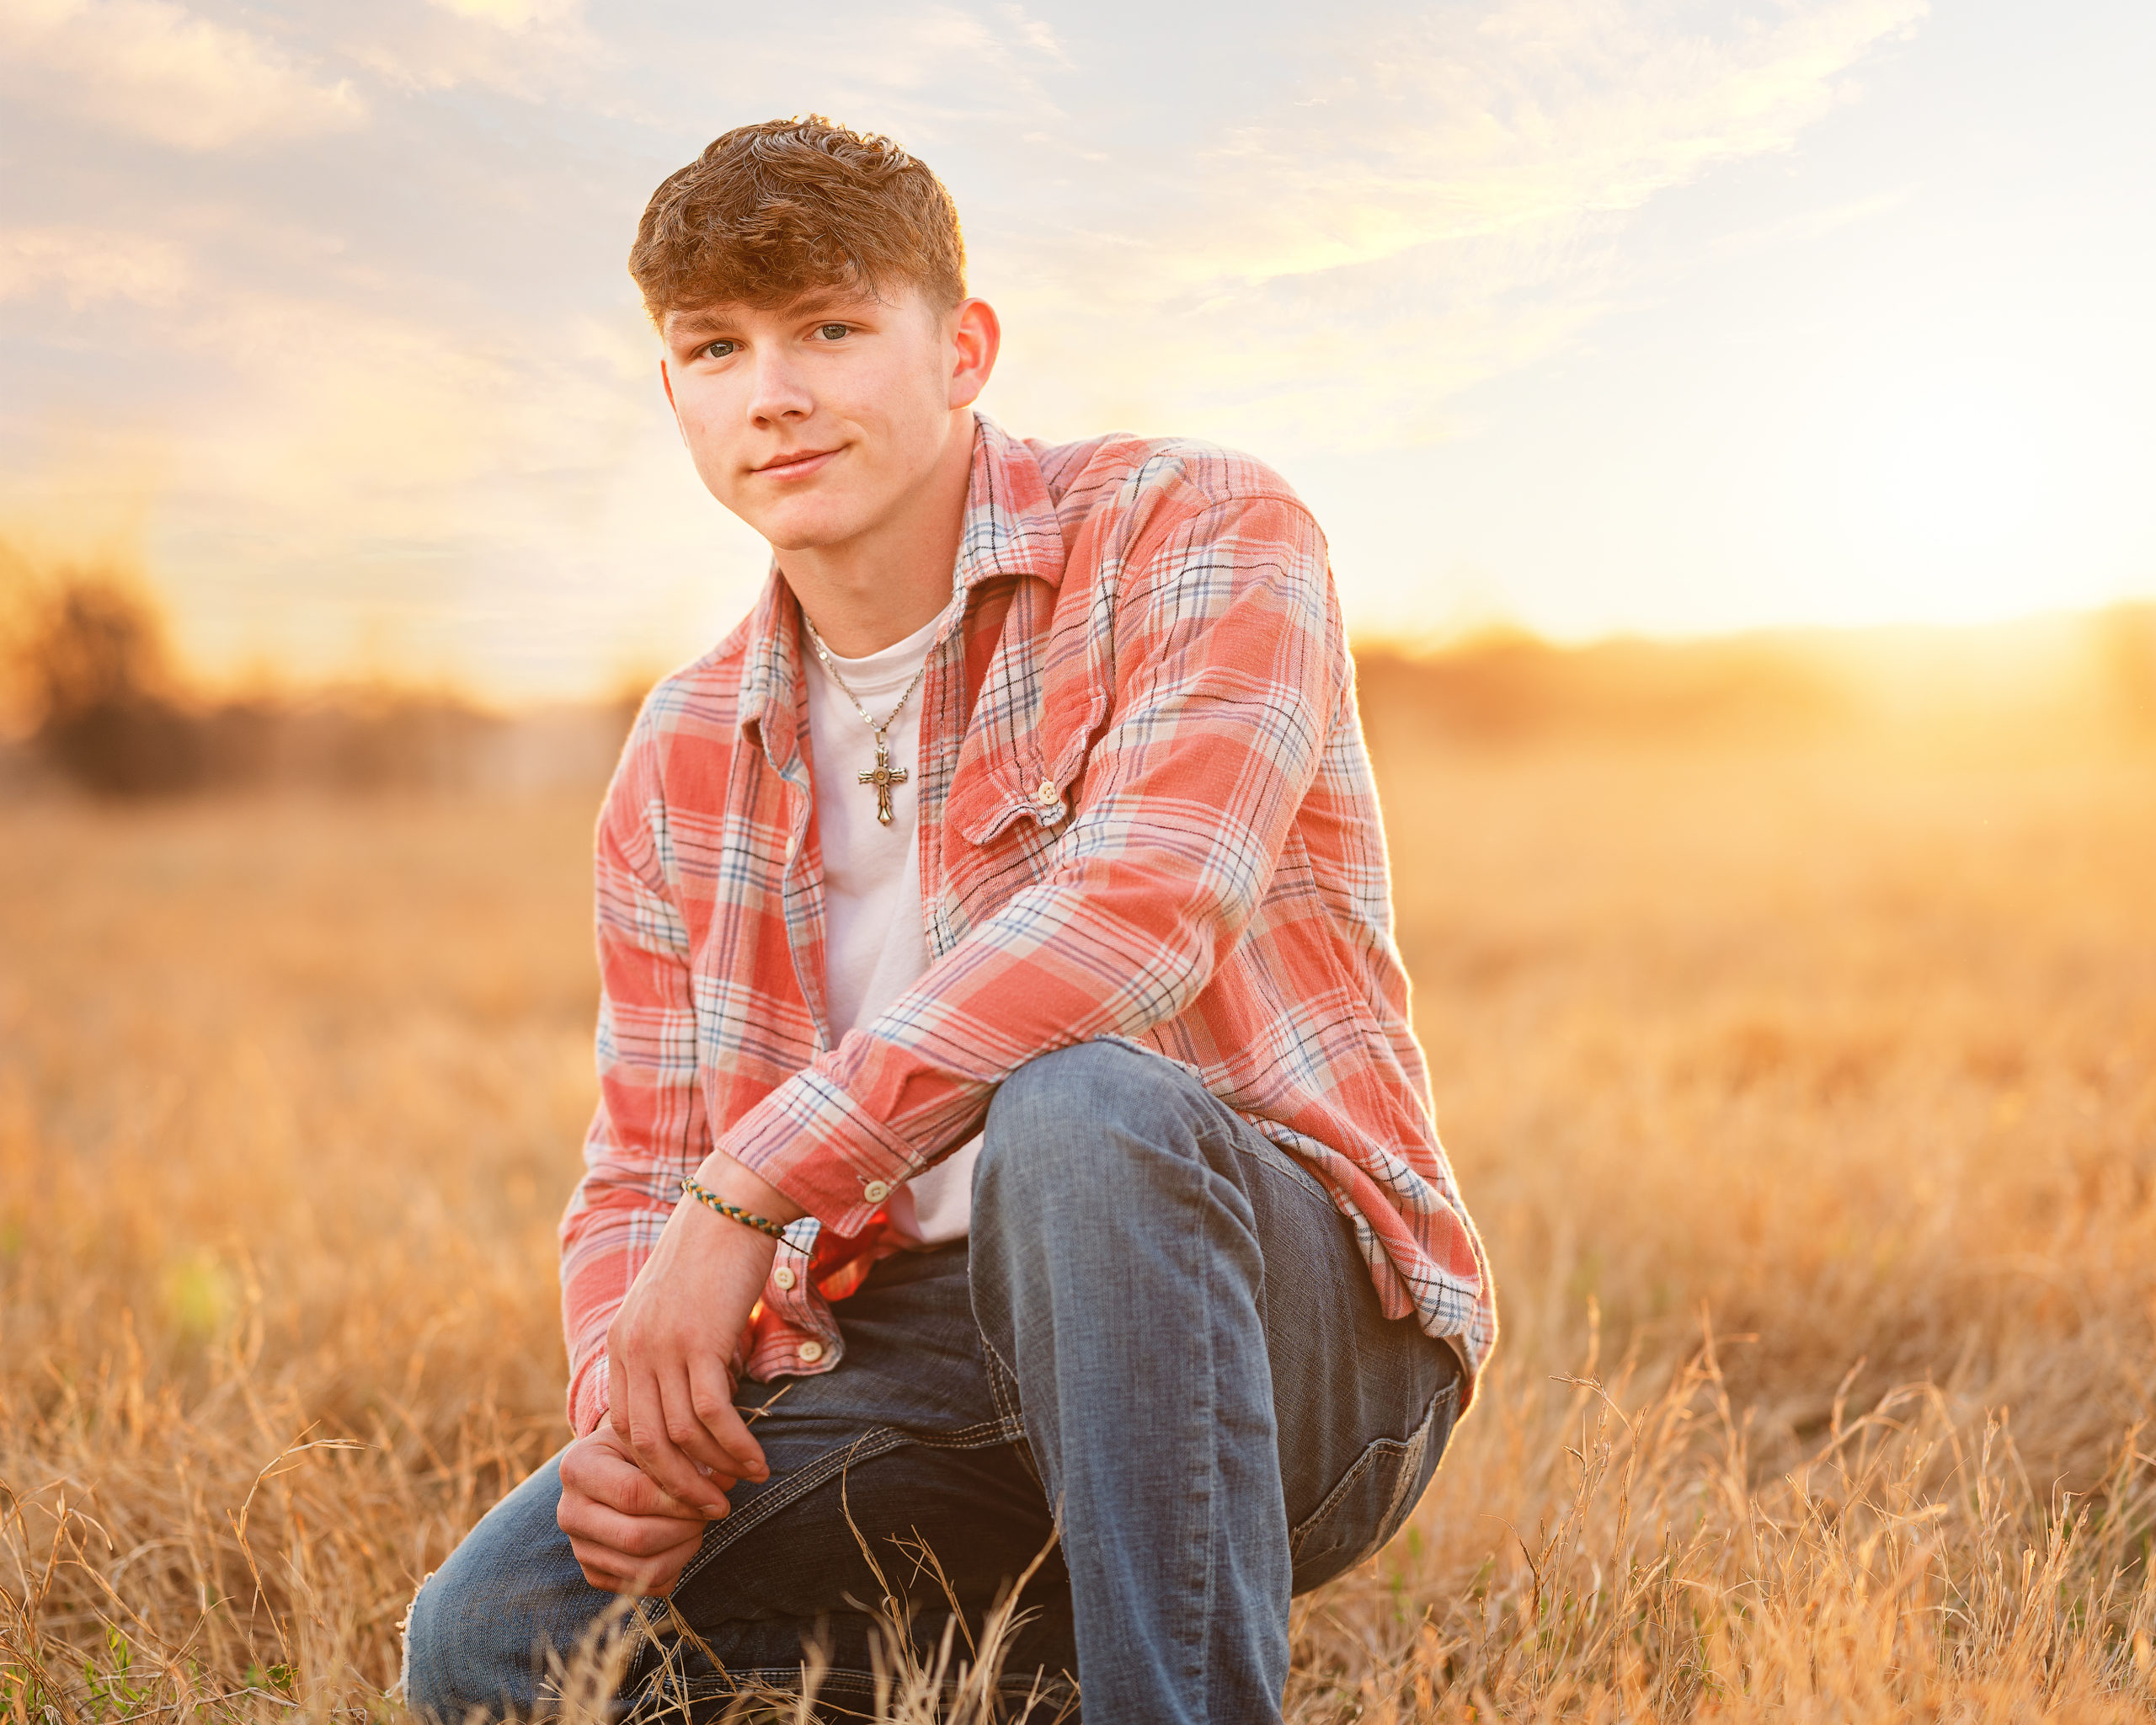 Teen Male at Sunset in open field